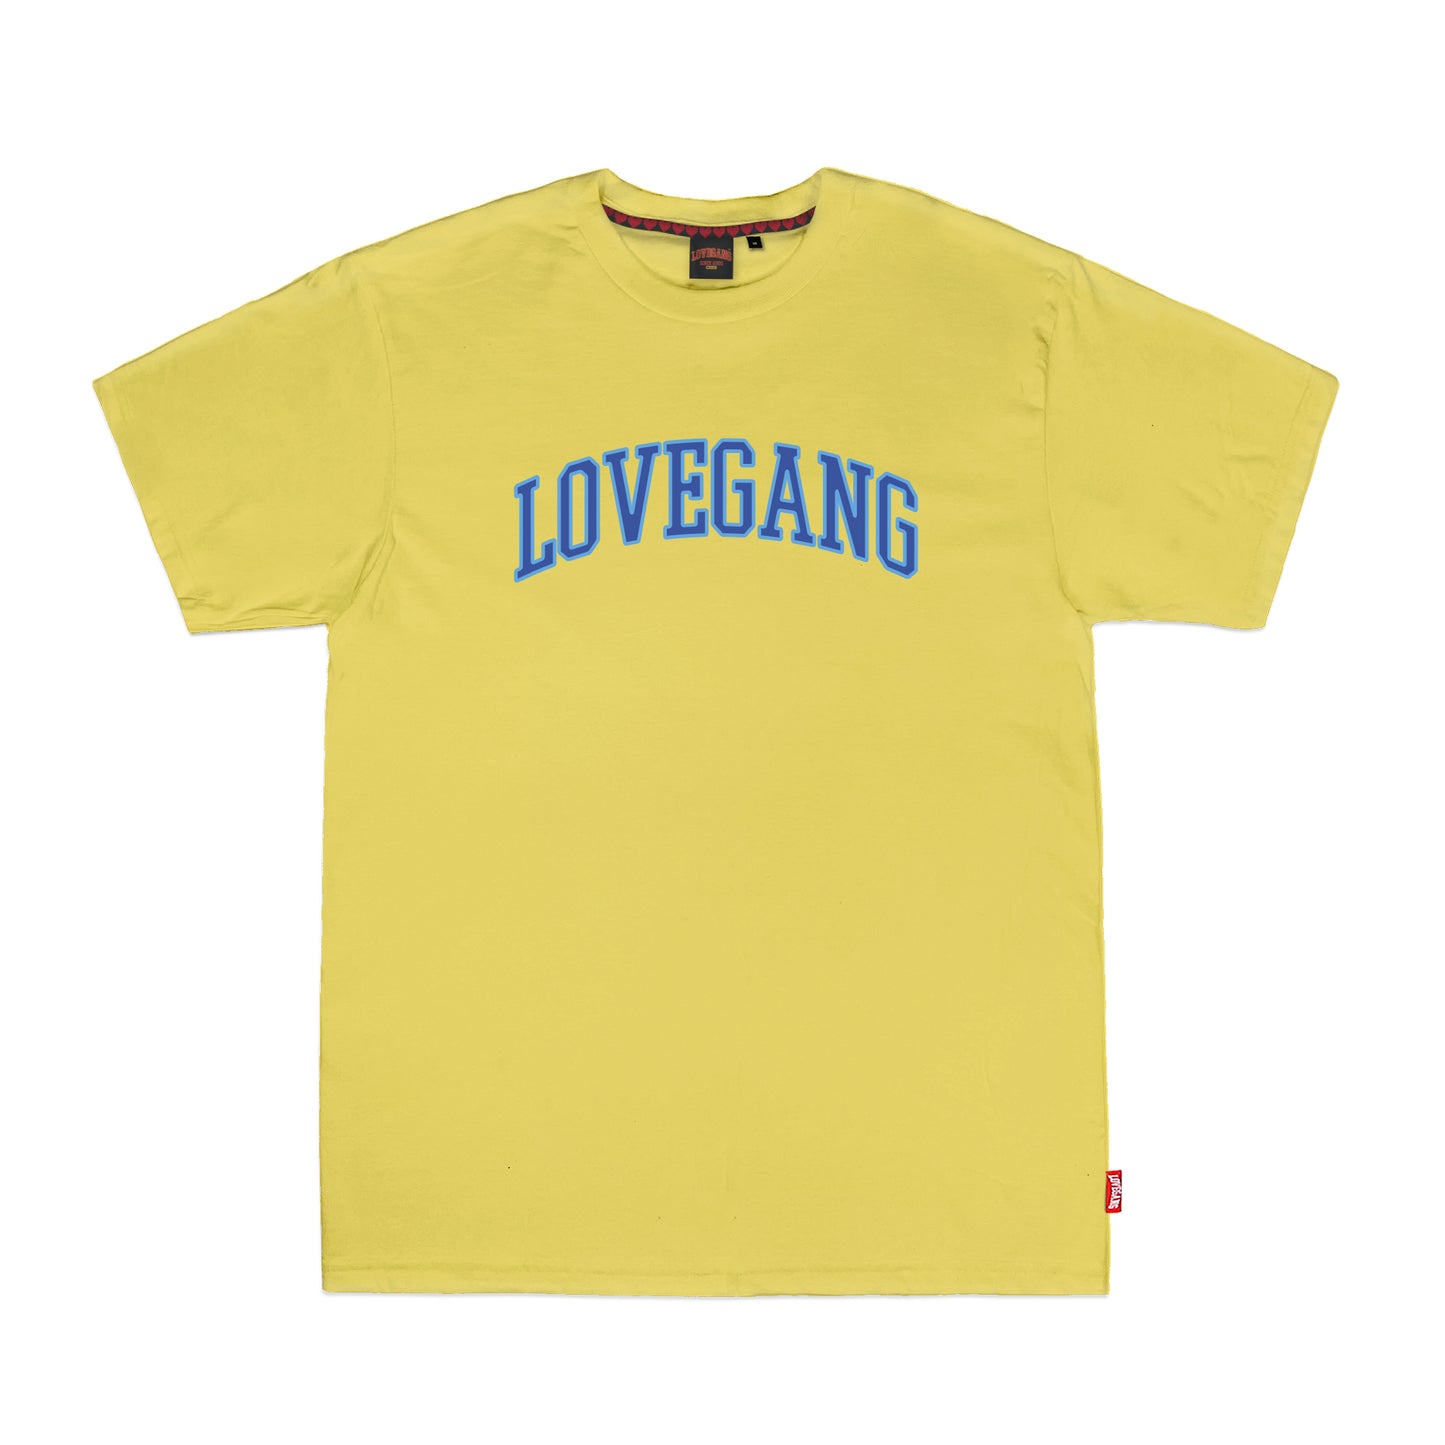 COLLEGE S/S'19 - T-SHIRT (YL)